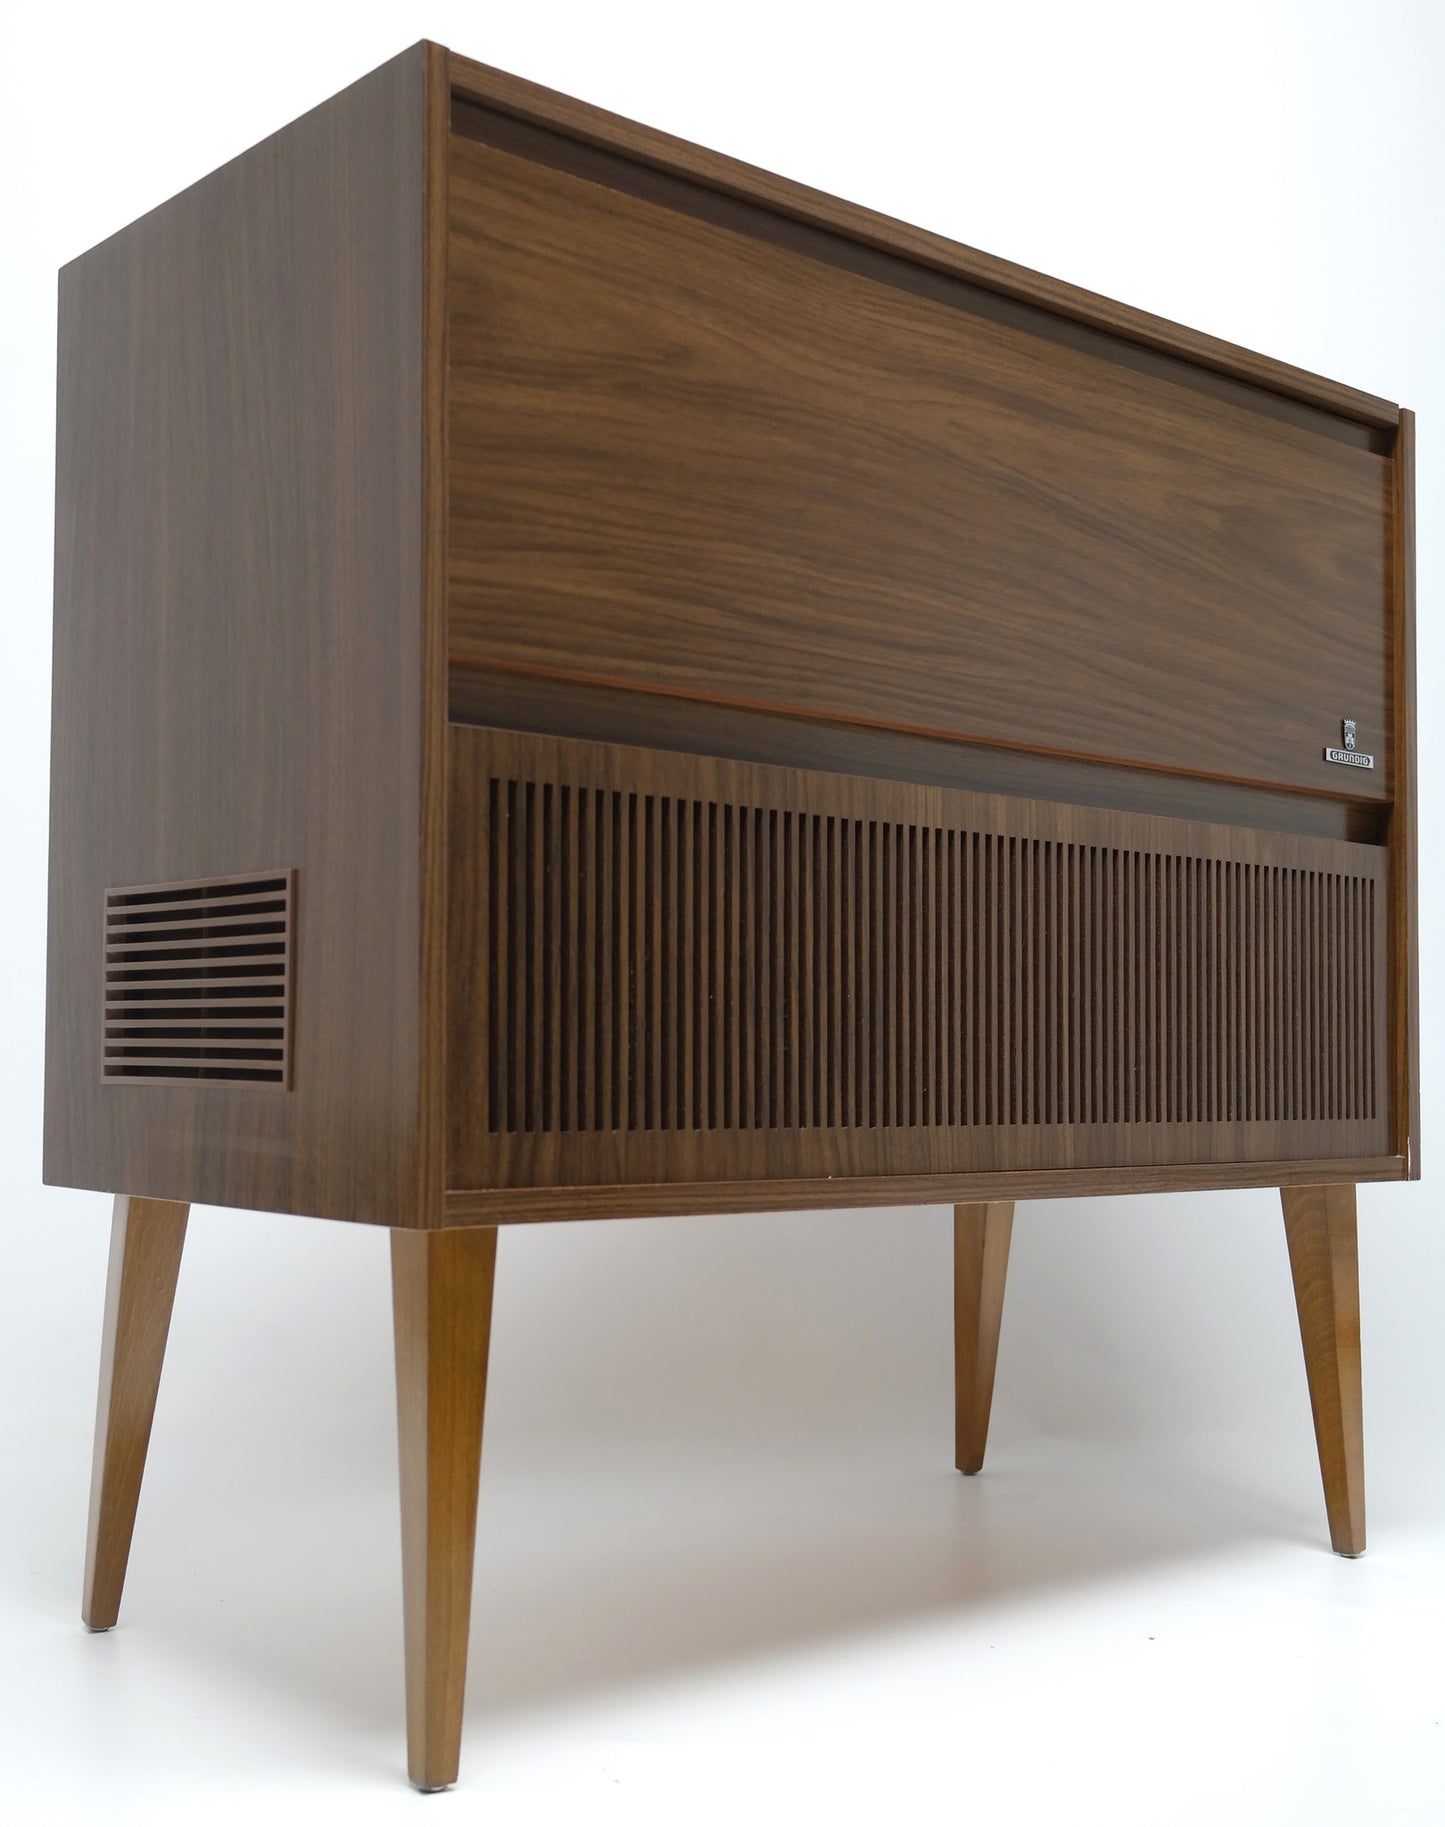 Mid Century Grundig Stereo Console Record Player - Bluetooth iPod iPhone Android Input AM/FM Tuner The Vintedge Co.